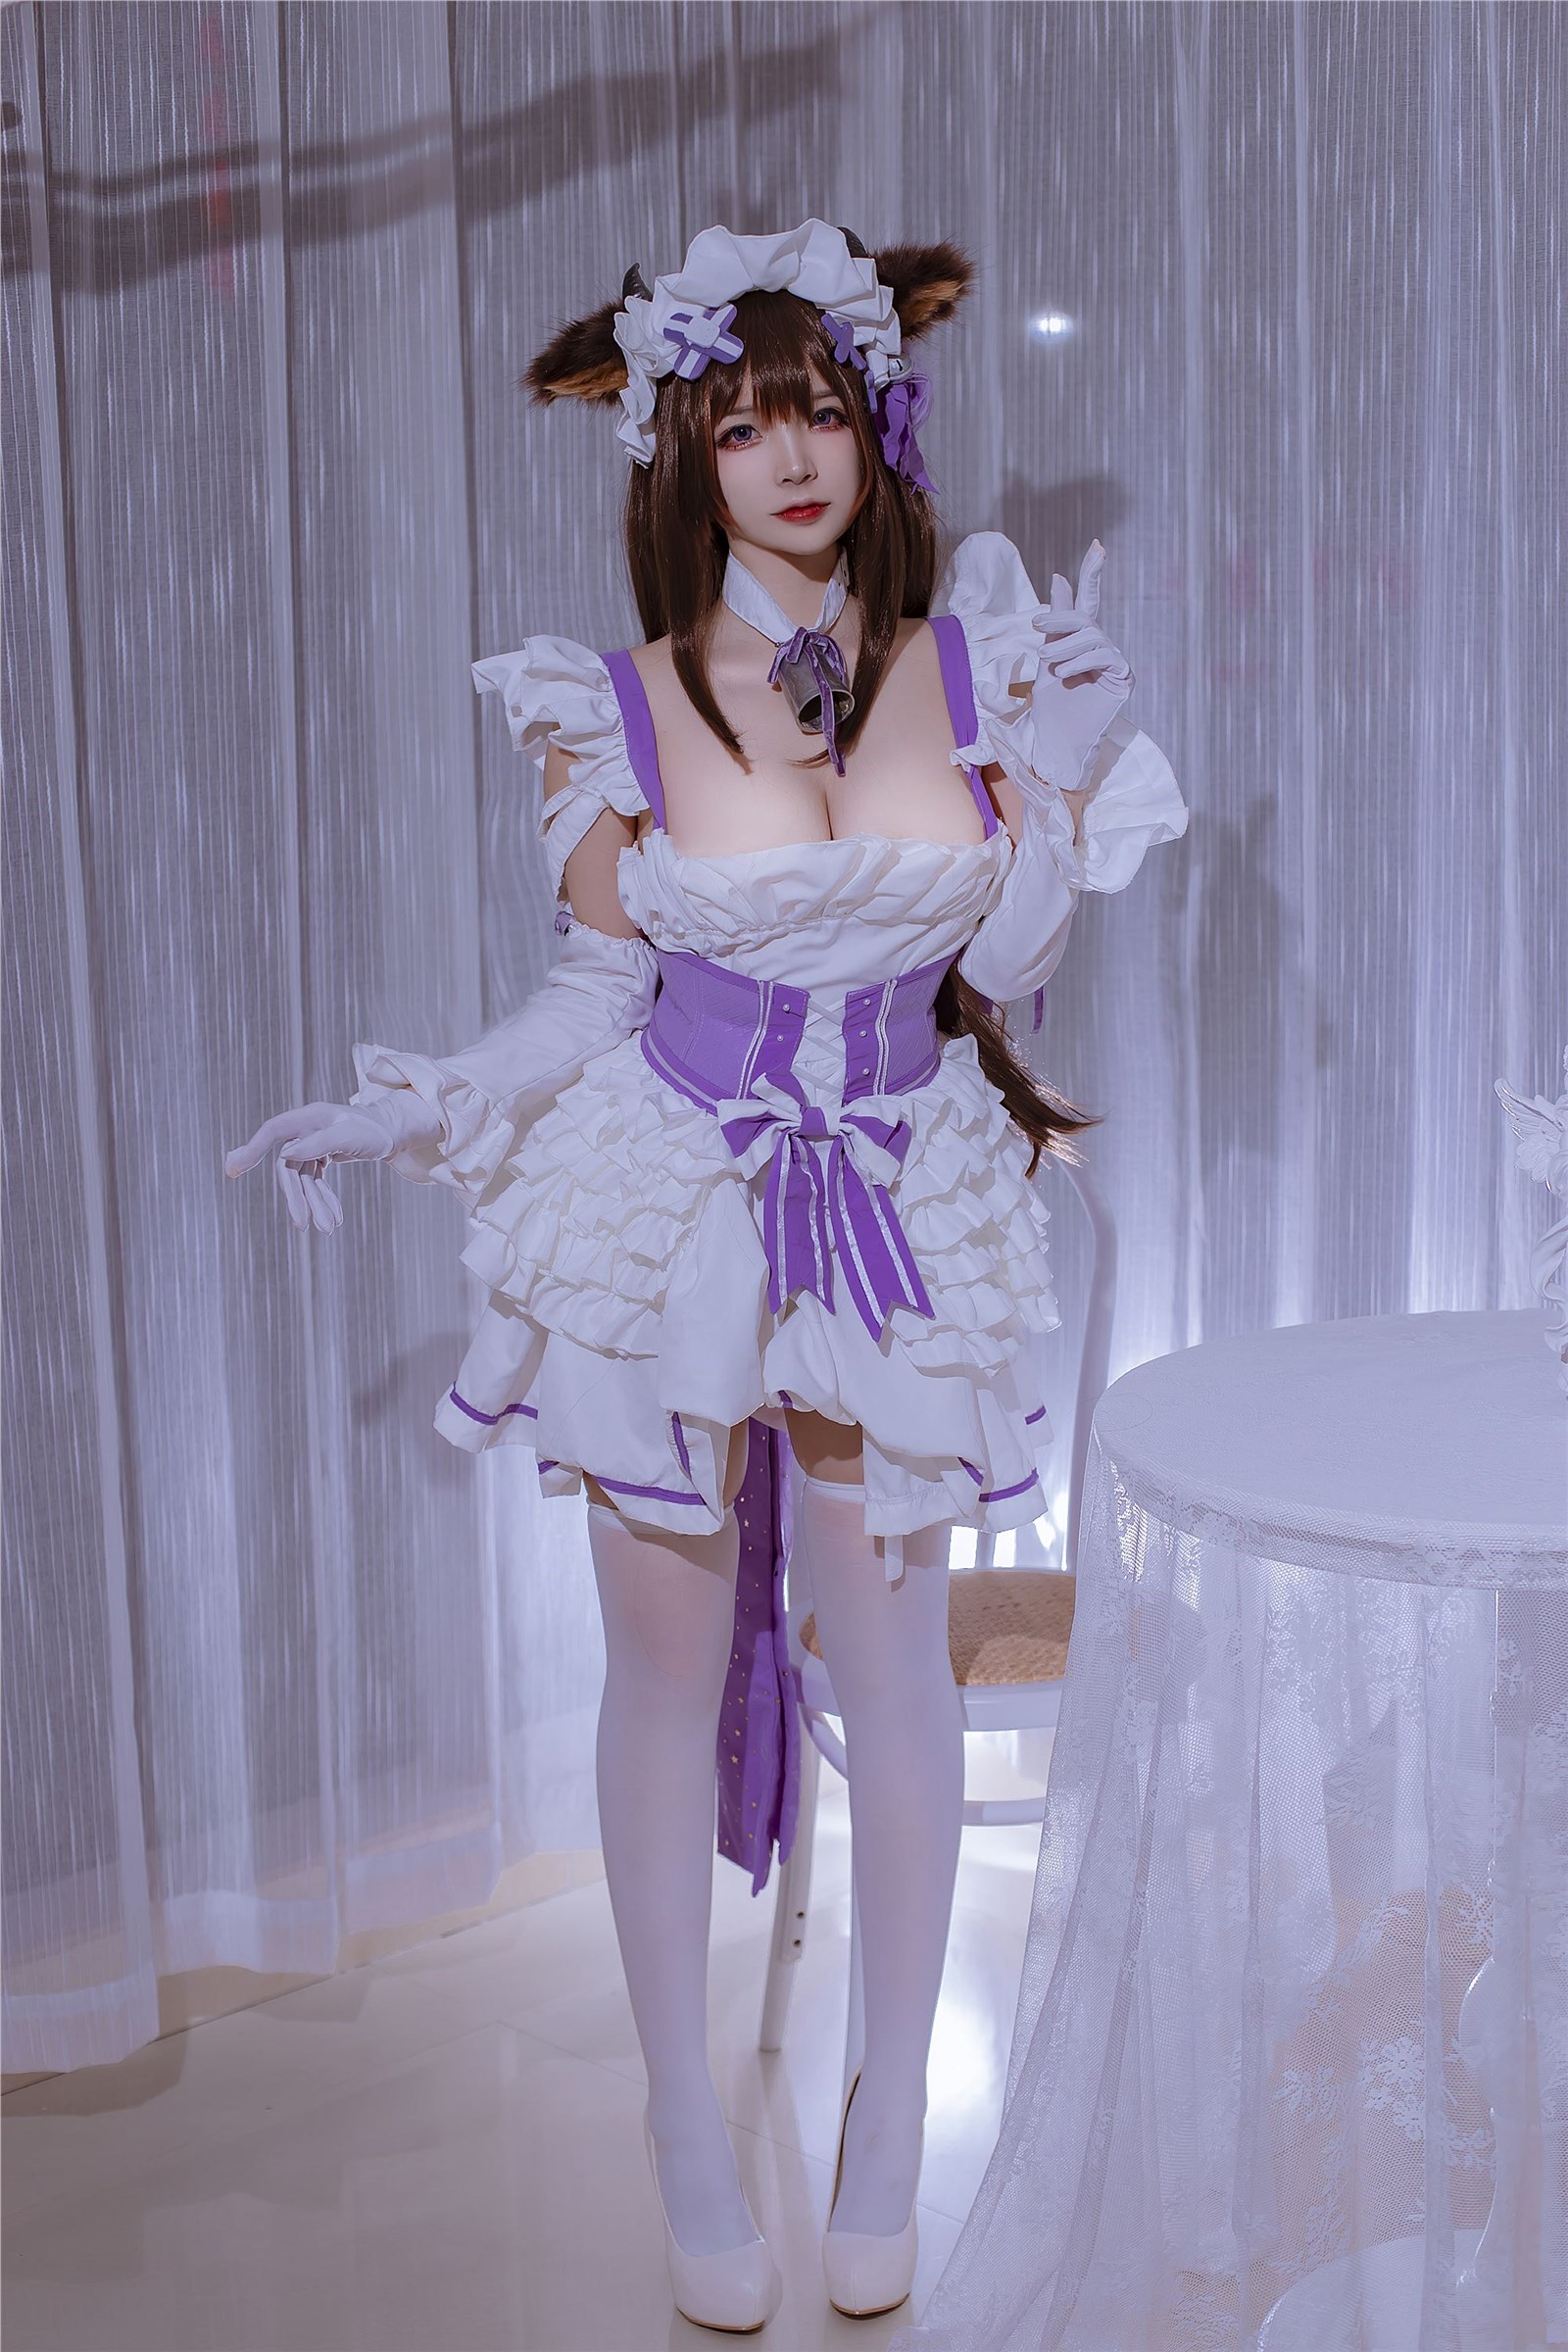 Nisa Nisa, a maid from the same family as Blue Jayano(24)